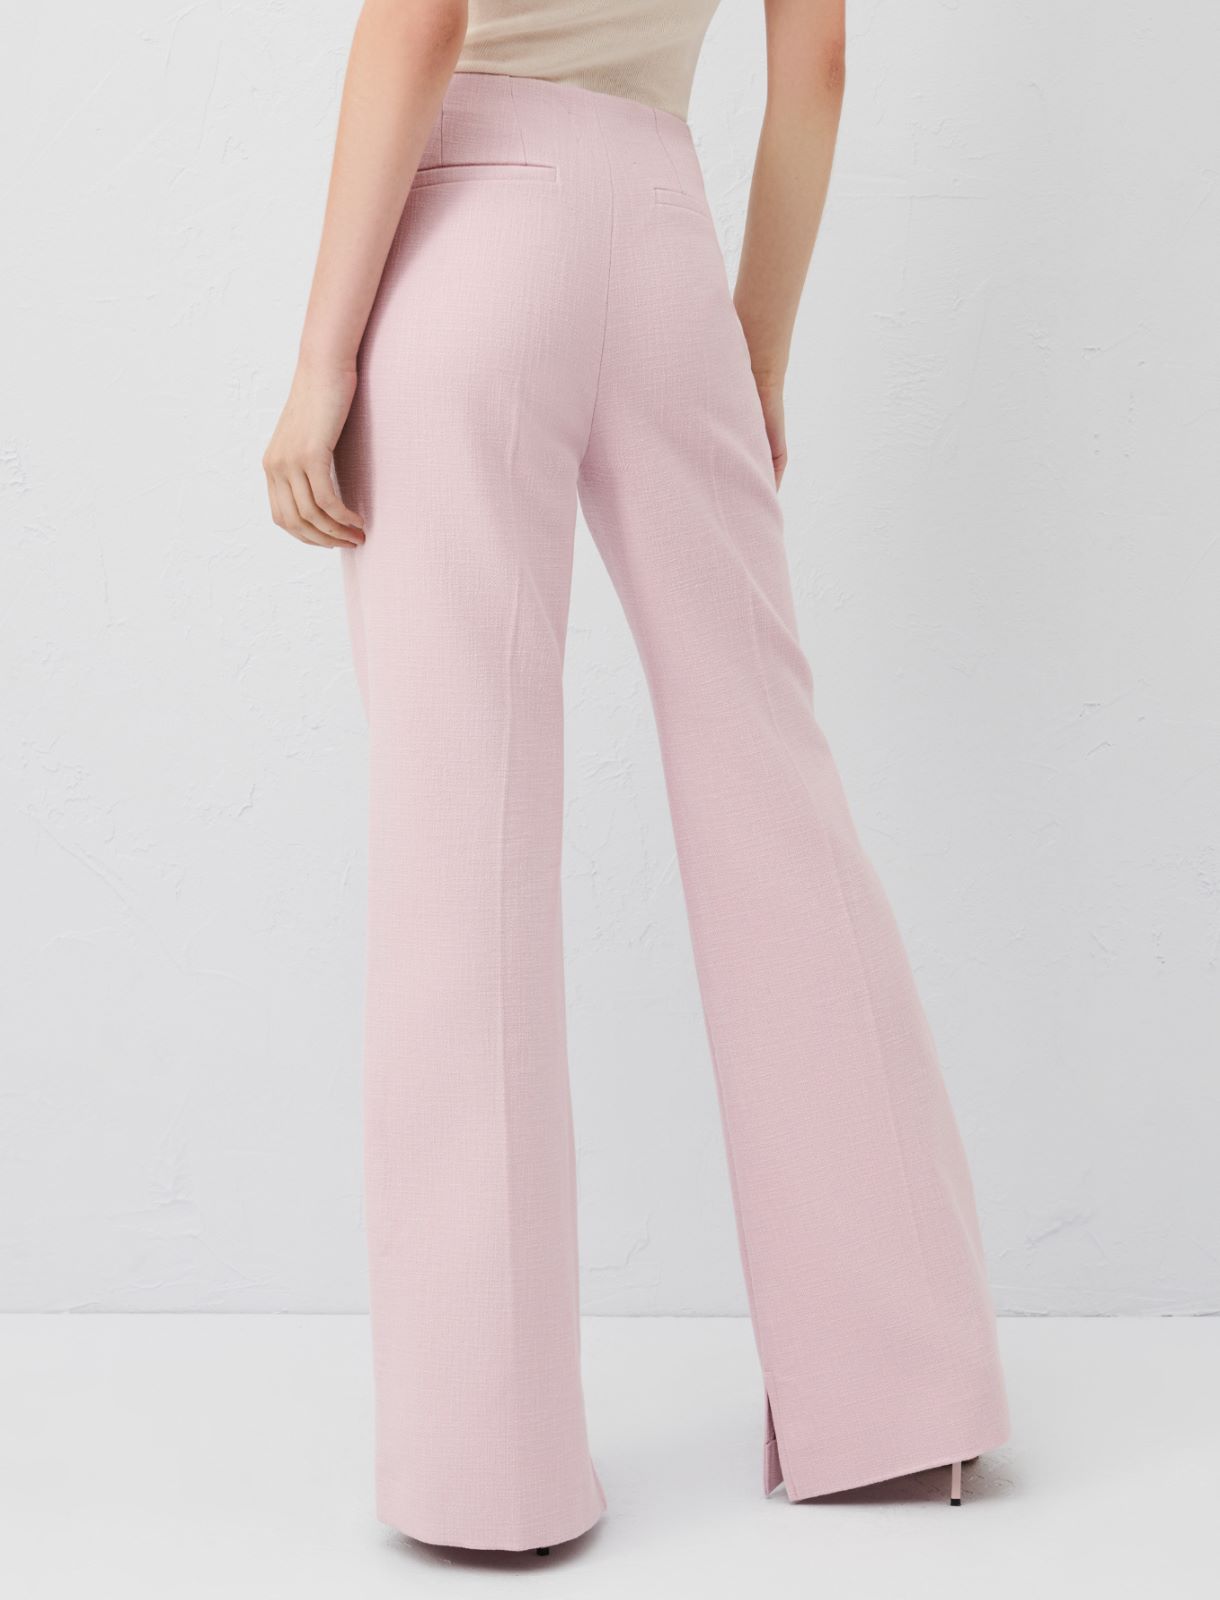 SOMETHINGNEW RUTH FLARE PANTS BAR - Trousers - prism pink/pink